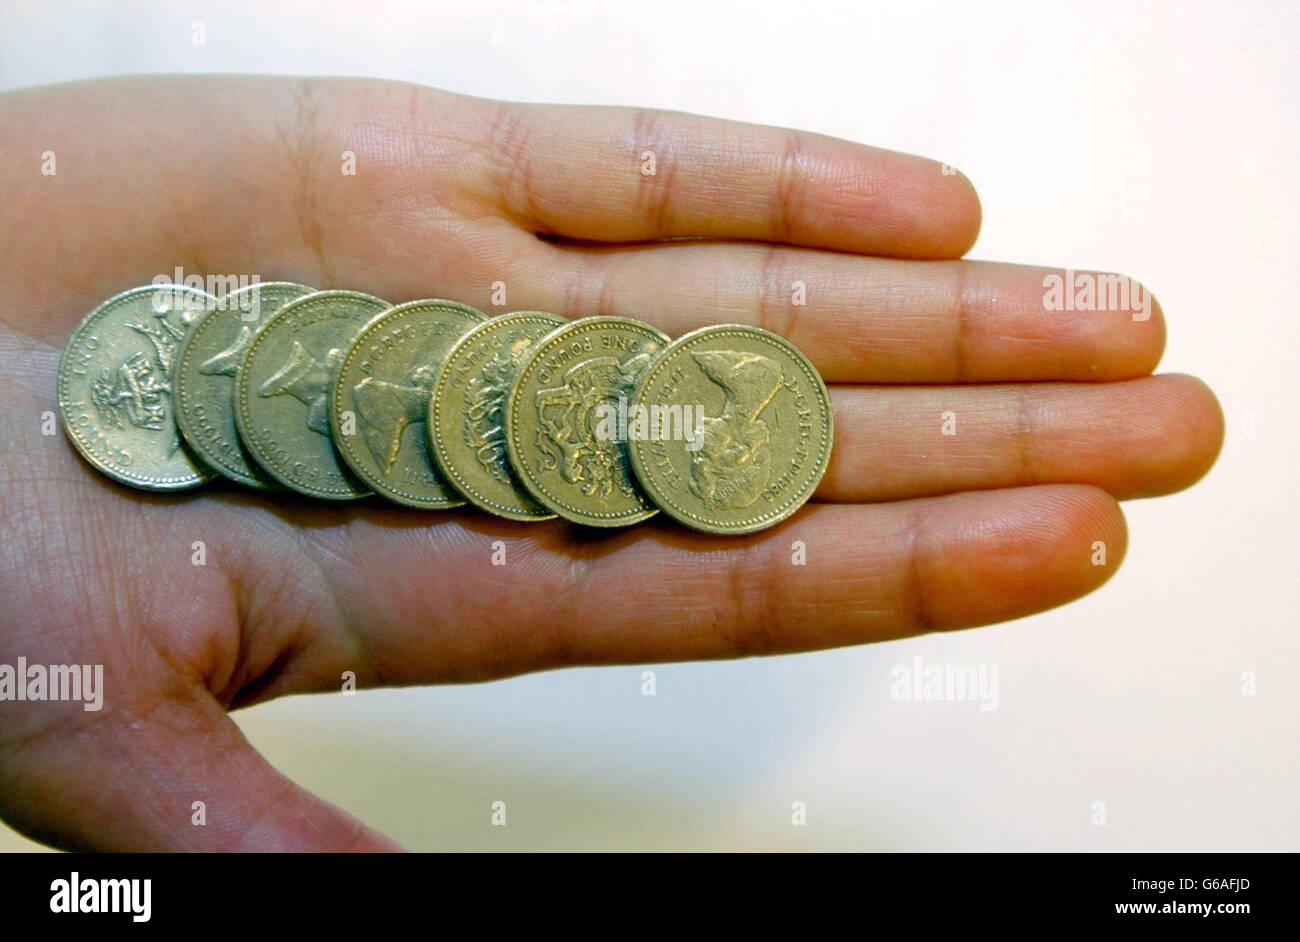 UK Currency - 1 coins. Stock picture of English One Pound Coins. Stock Photo